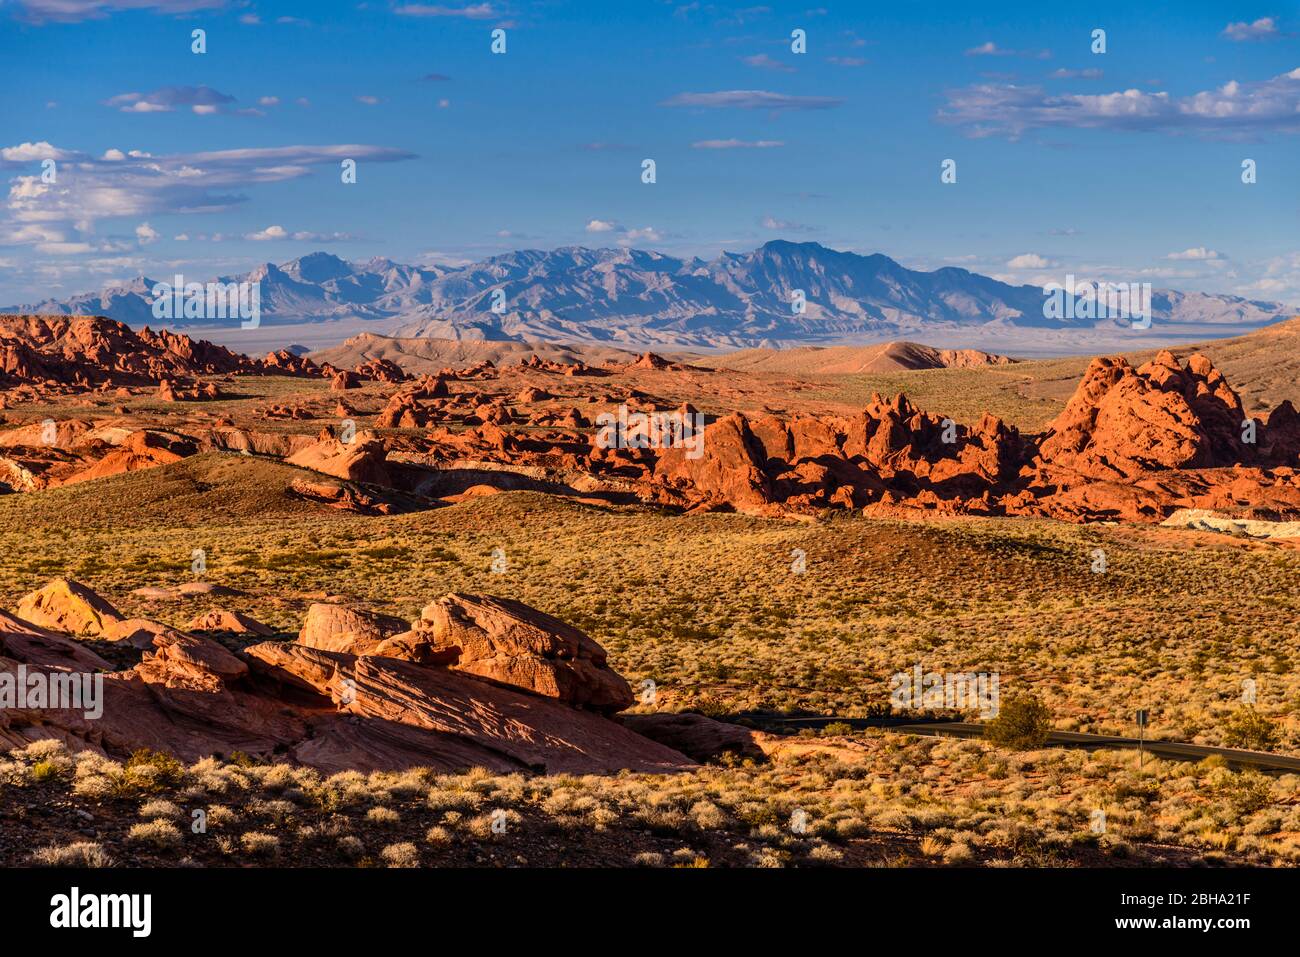 USA, Nevada, Clark County, Overton, Valley of Fire State Park, Felsformationen am White Domes Scenic Byway nahe White Domes Stock Photo